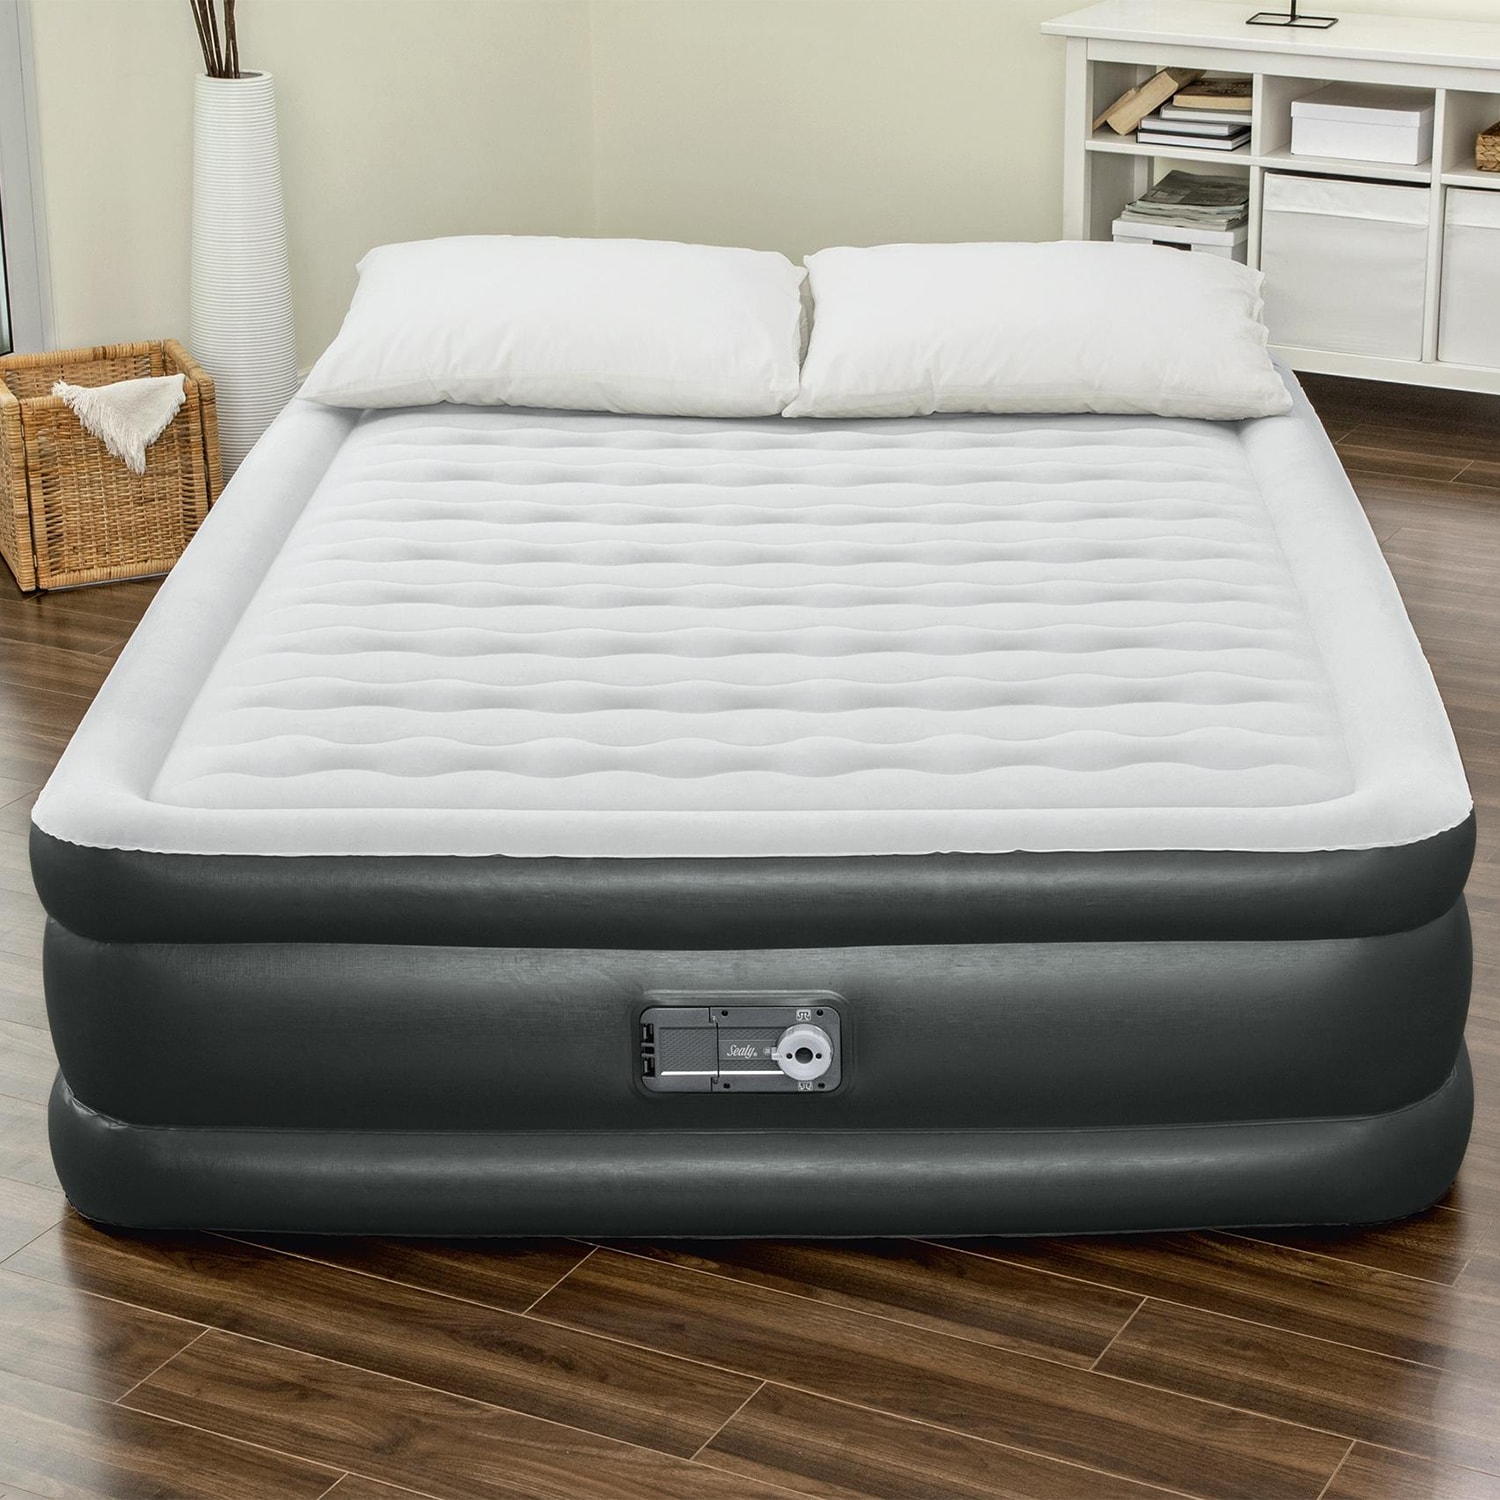 Serta Queen Size Double High Air Mattress with NeverFlat AC Pump -  Brown/Tan, Indoor/Outdoor Use, Customizable Firmness, PVC Material in the Air  Mattresses department at